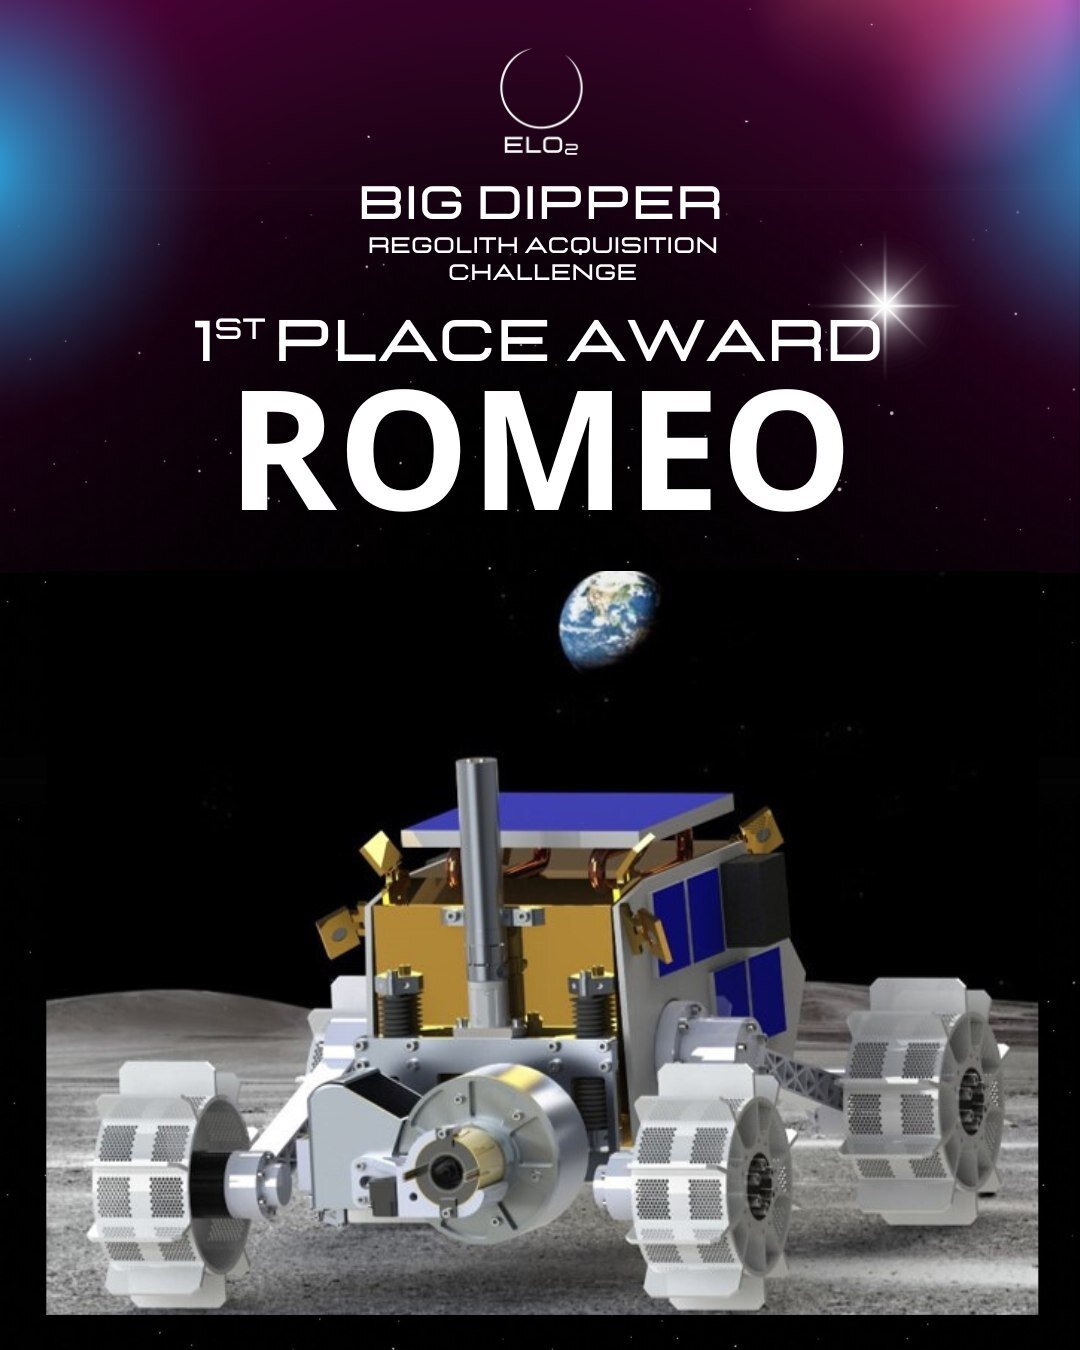 Congratulations to one of three @ELO2.au Big Dipper Challenge 1st Place Winners &ndash; ROMEO! ⁠
⁠
Winning designs were judged on creativity, functionality, durability, scalability, and evidence of design optimisation. The Regolith Oxygen Magnetic Ex